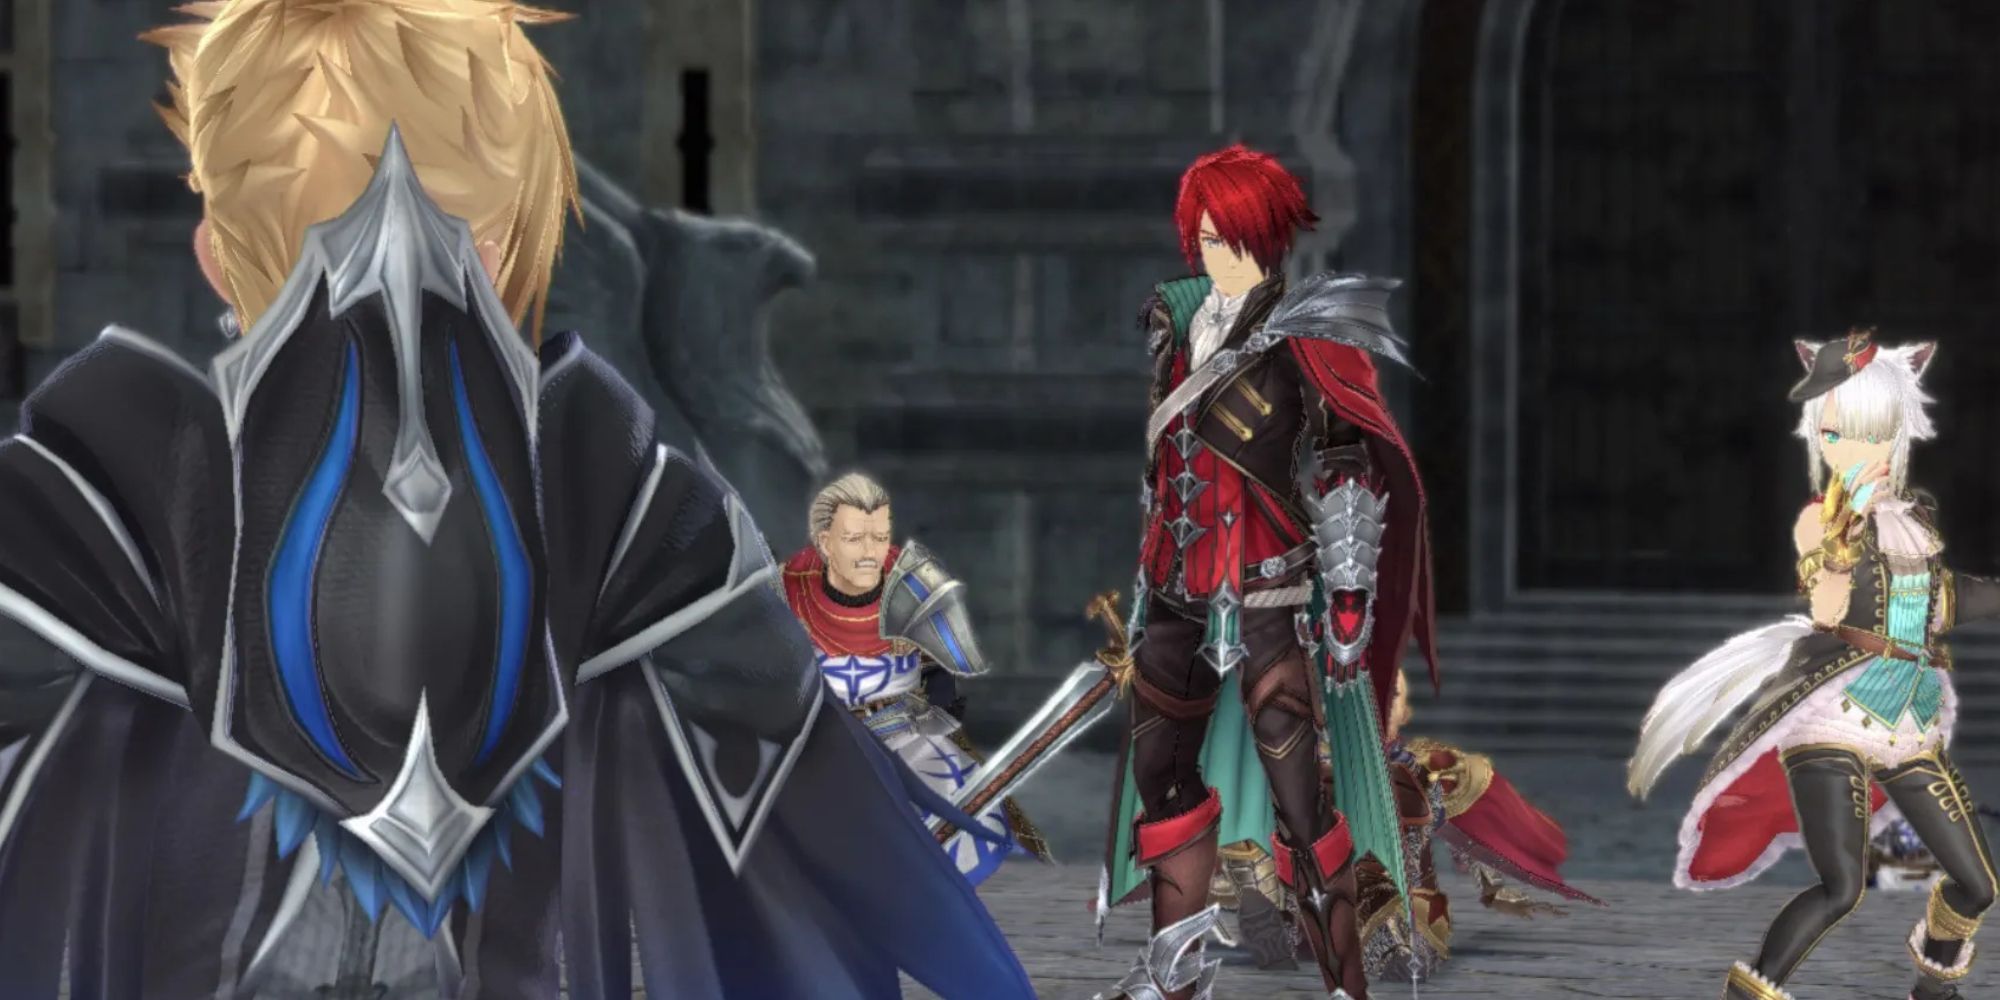 Ys 9 Adol and the party in a confrontation scene